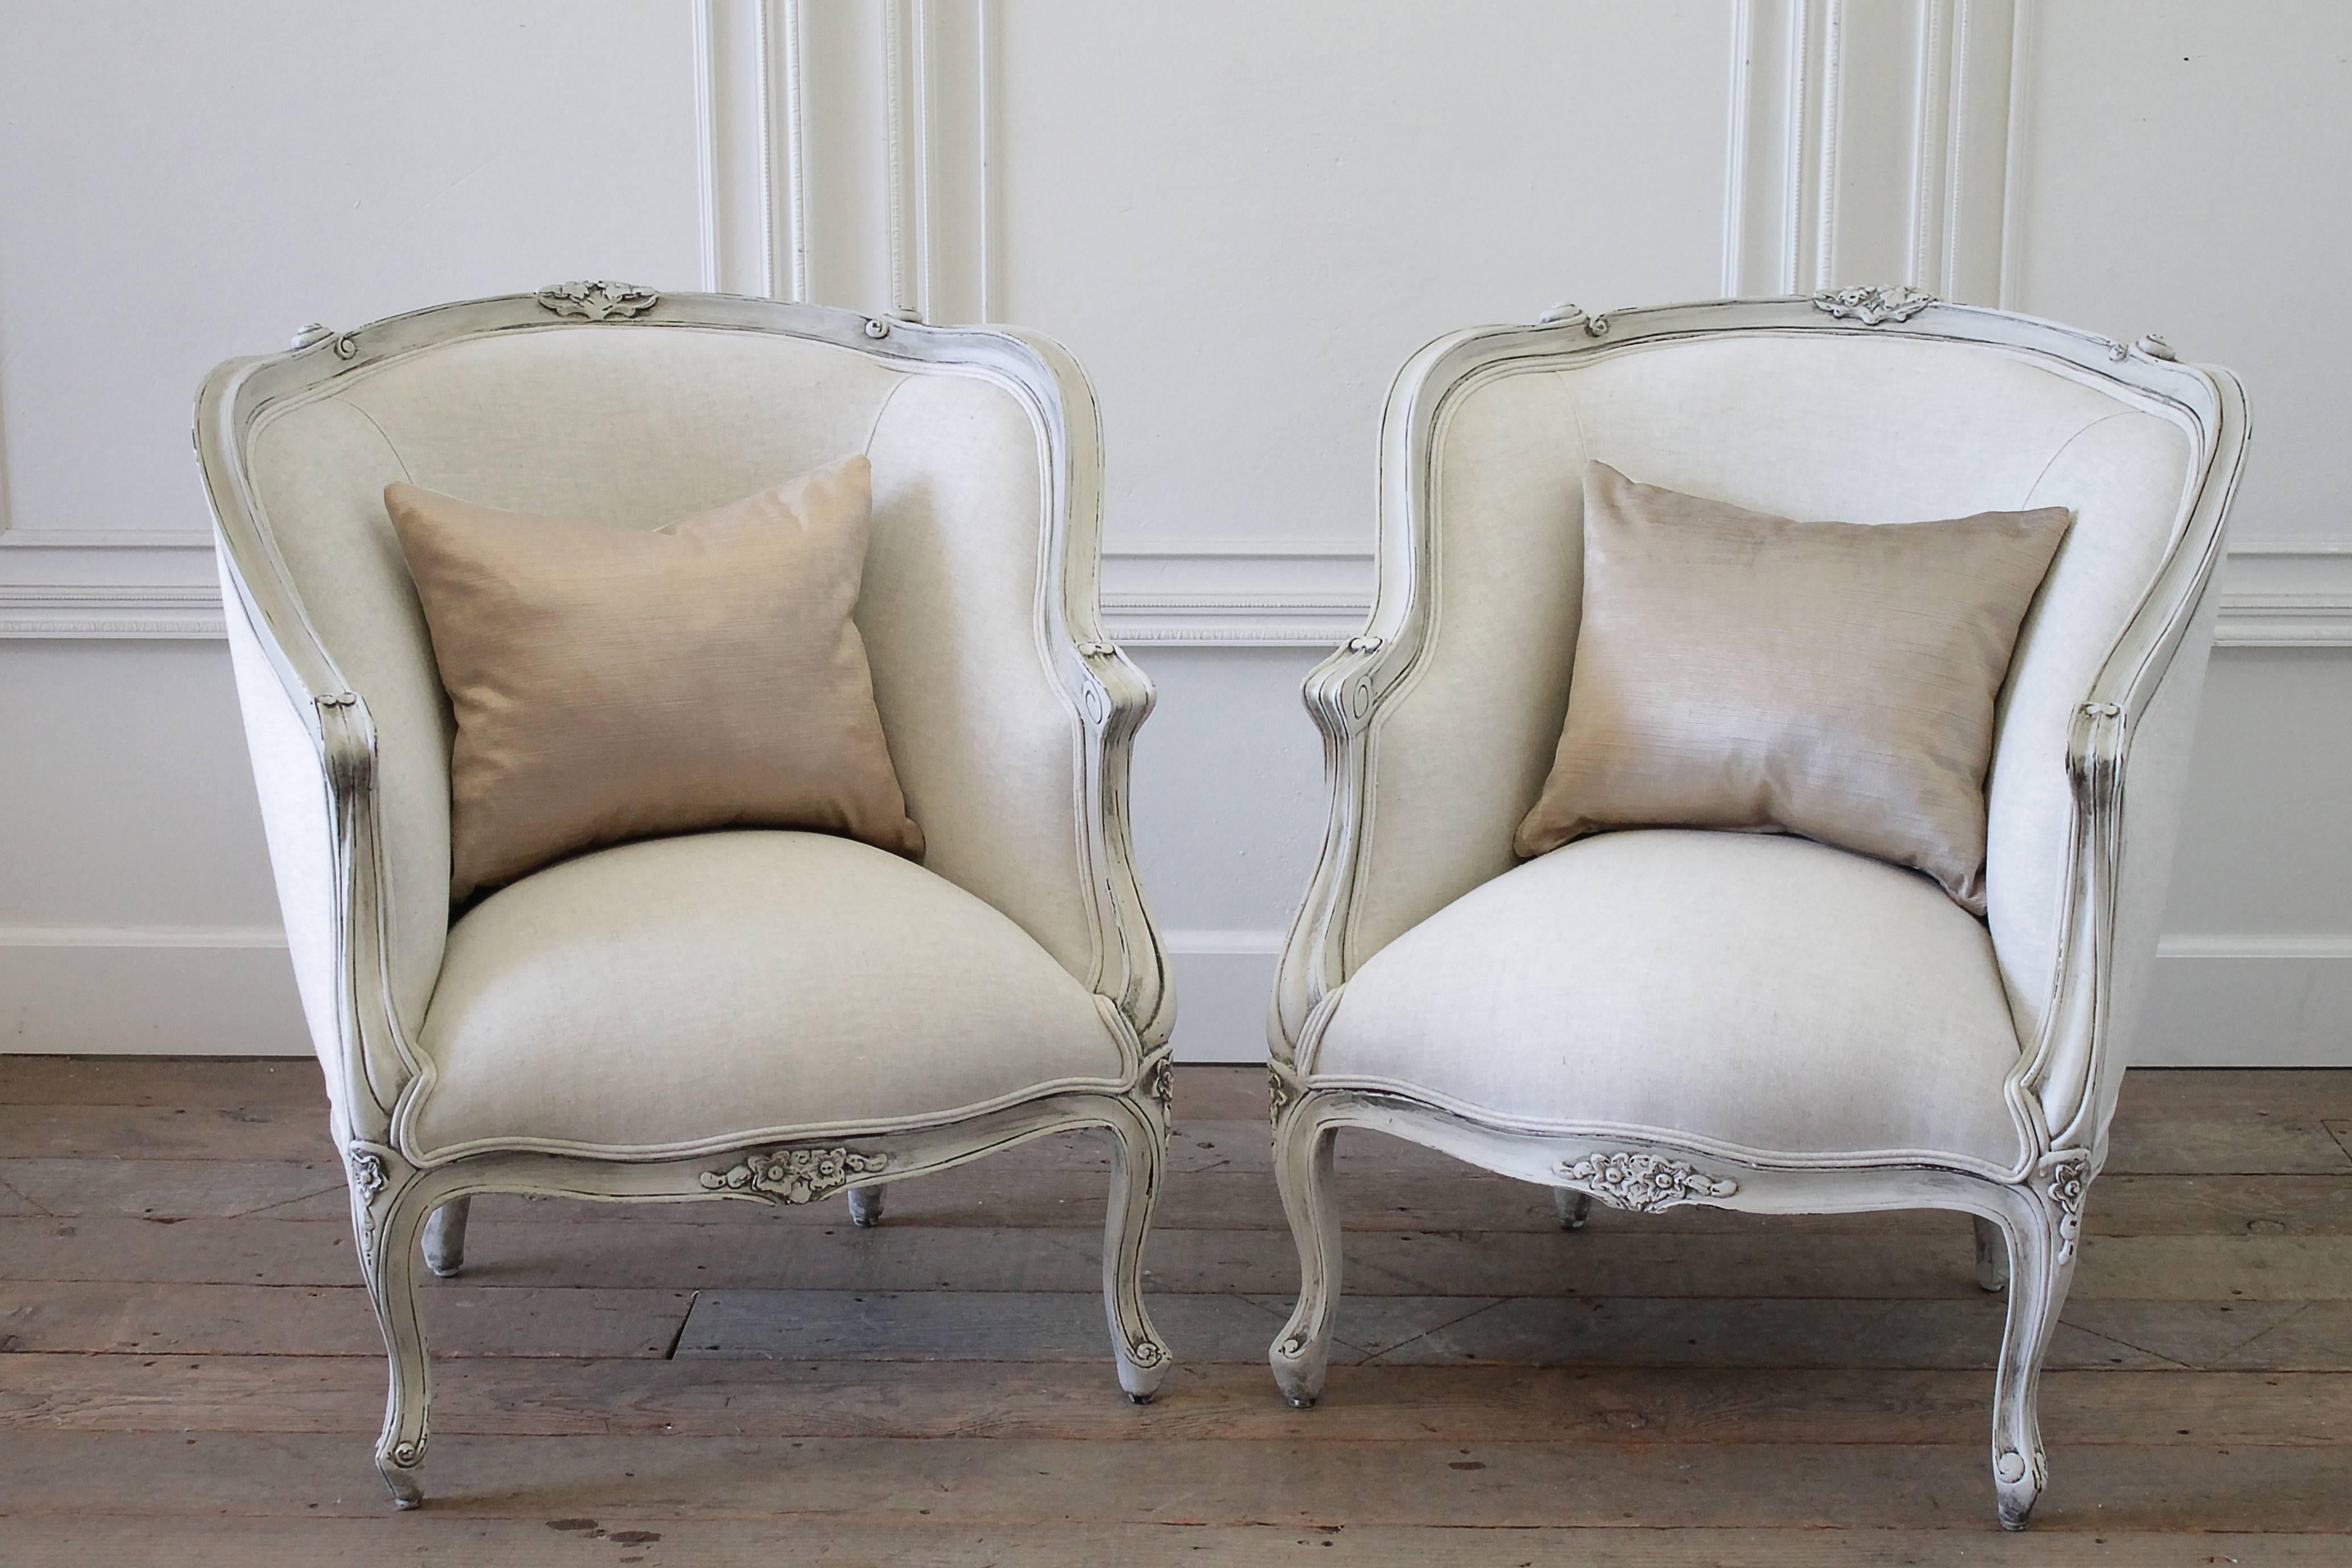 20th century painted and upholstered pair of linen Bergere chairs

These frames have been refinished in a soft pale oyster white, with a subtle grey undertone. The frames have a subtle distressed finished and hand glazed patina. Upholstery is done